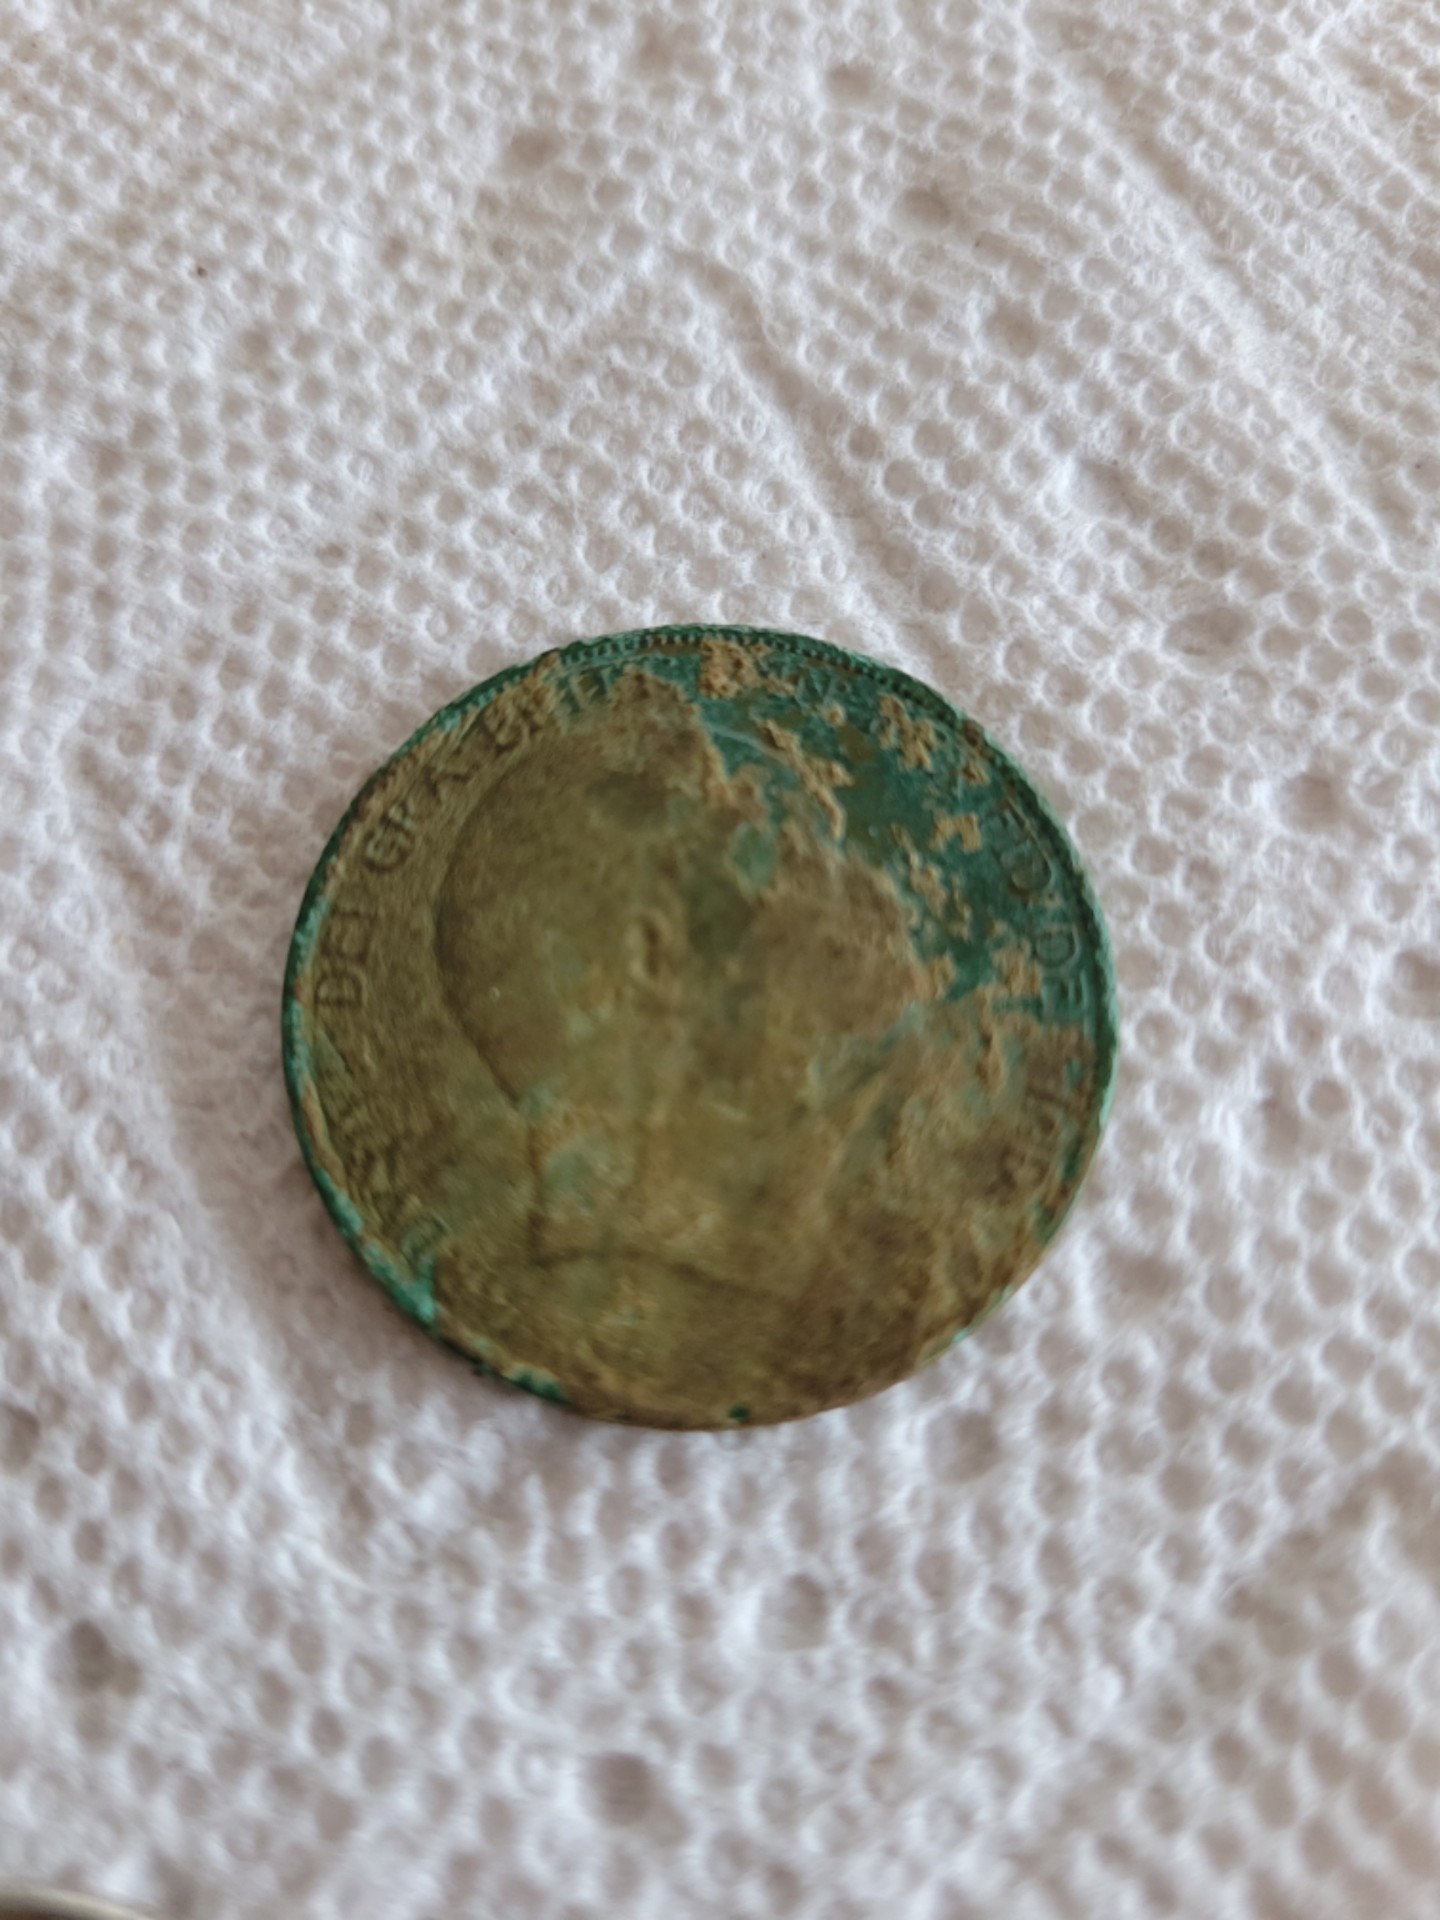 Conserving Detected Dug Coins & Relics - Metal Detecting For Coins